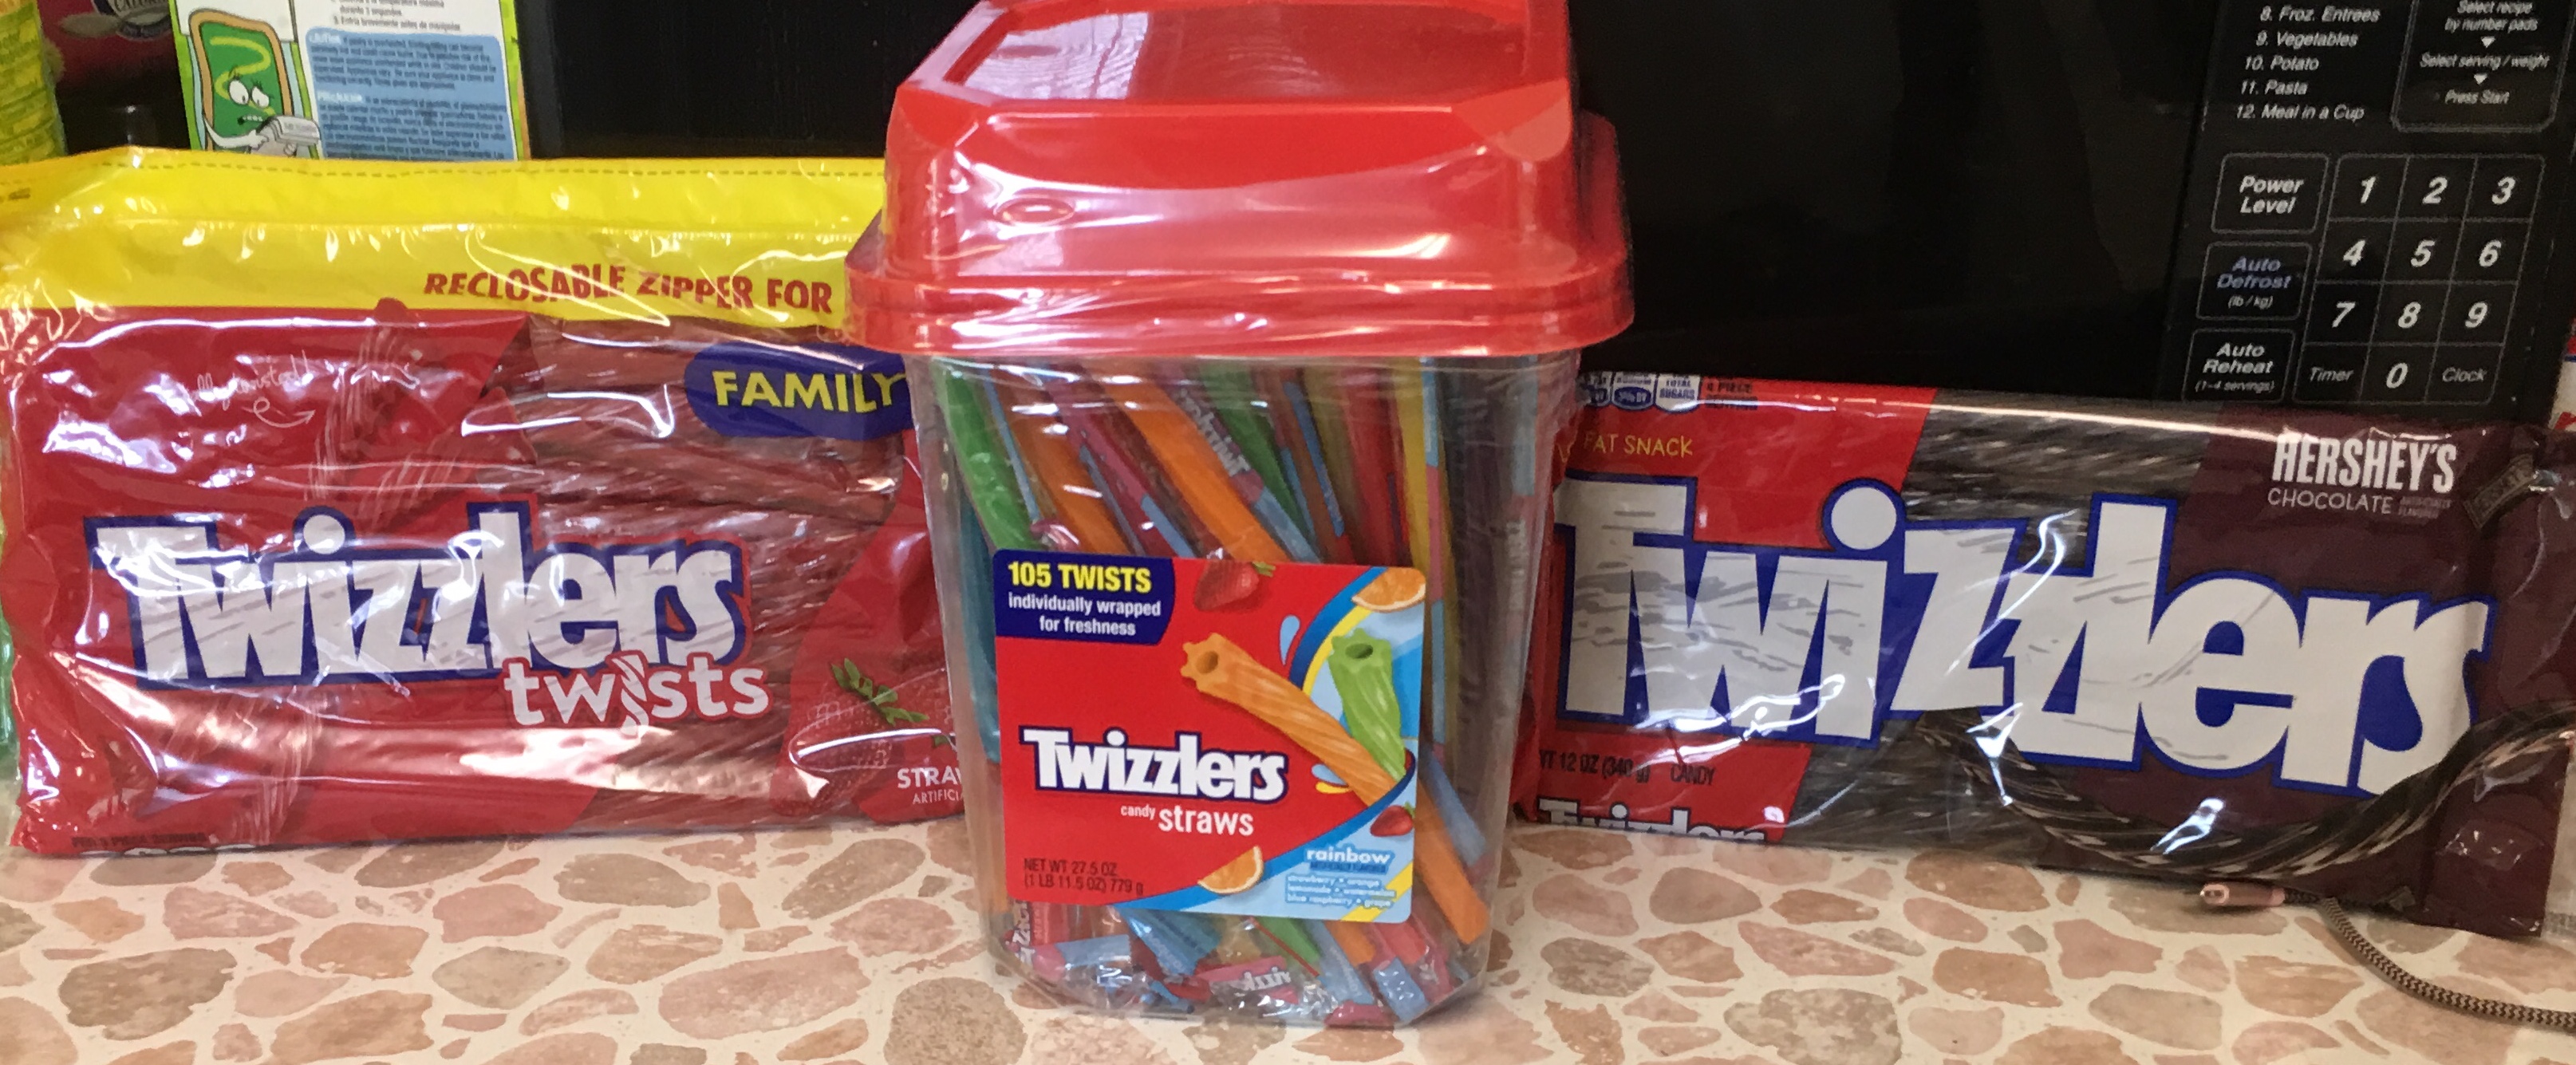 Twizzlers can be so additiving